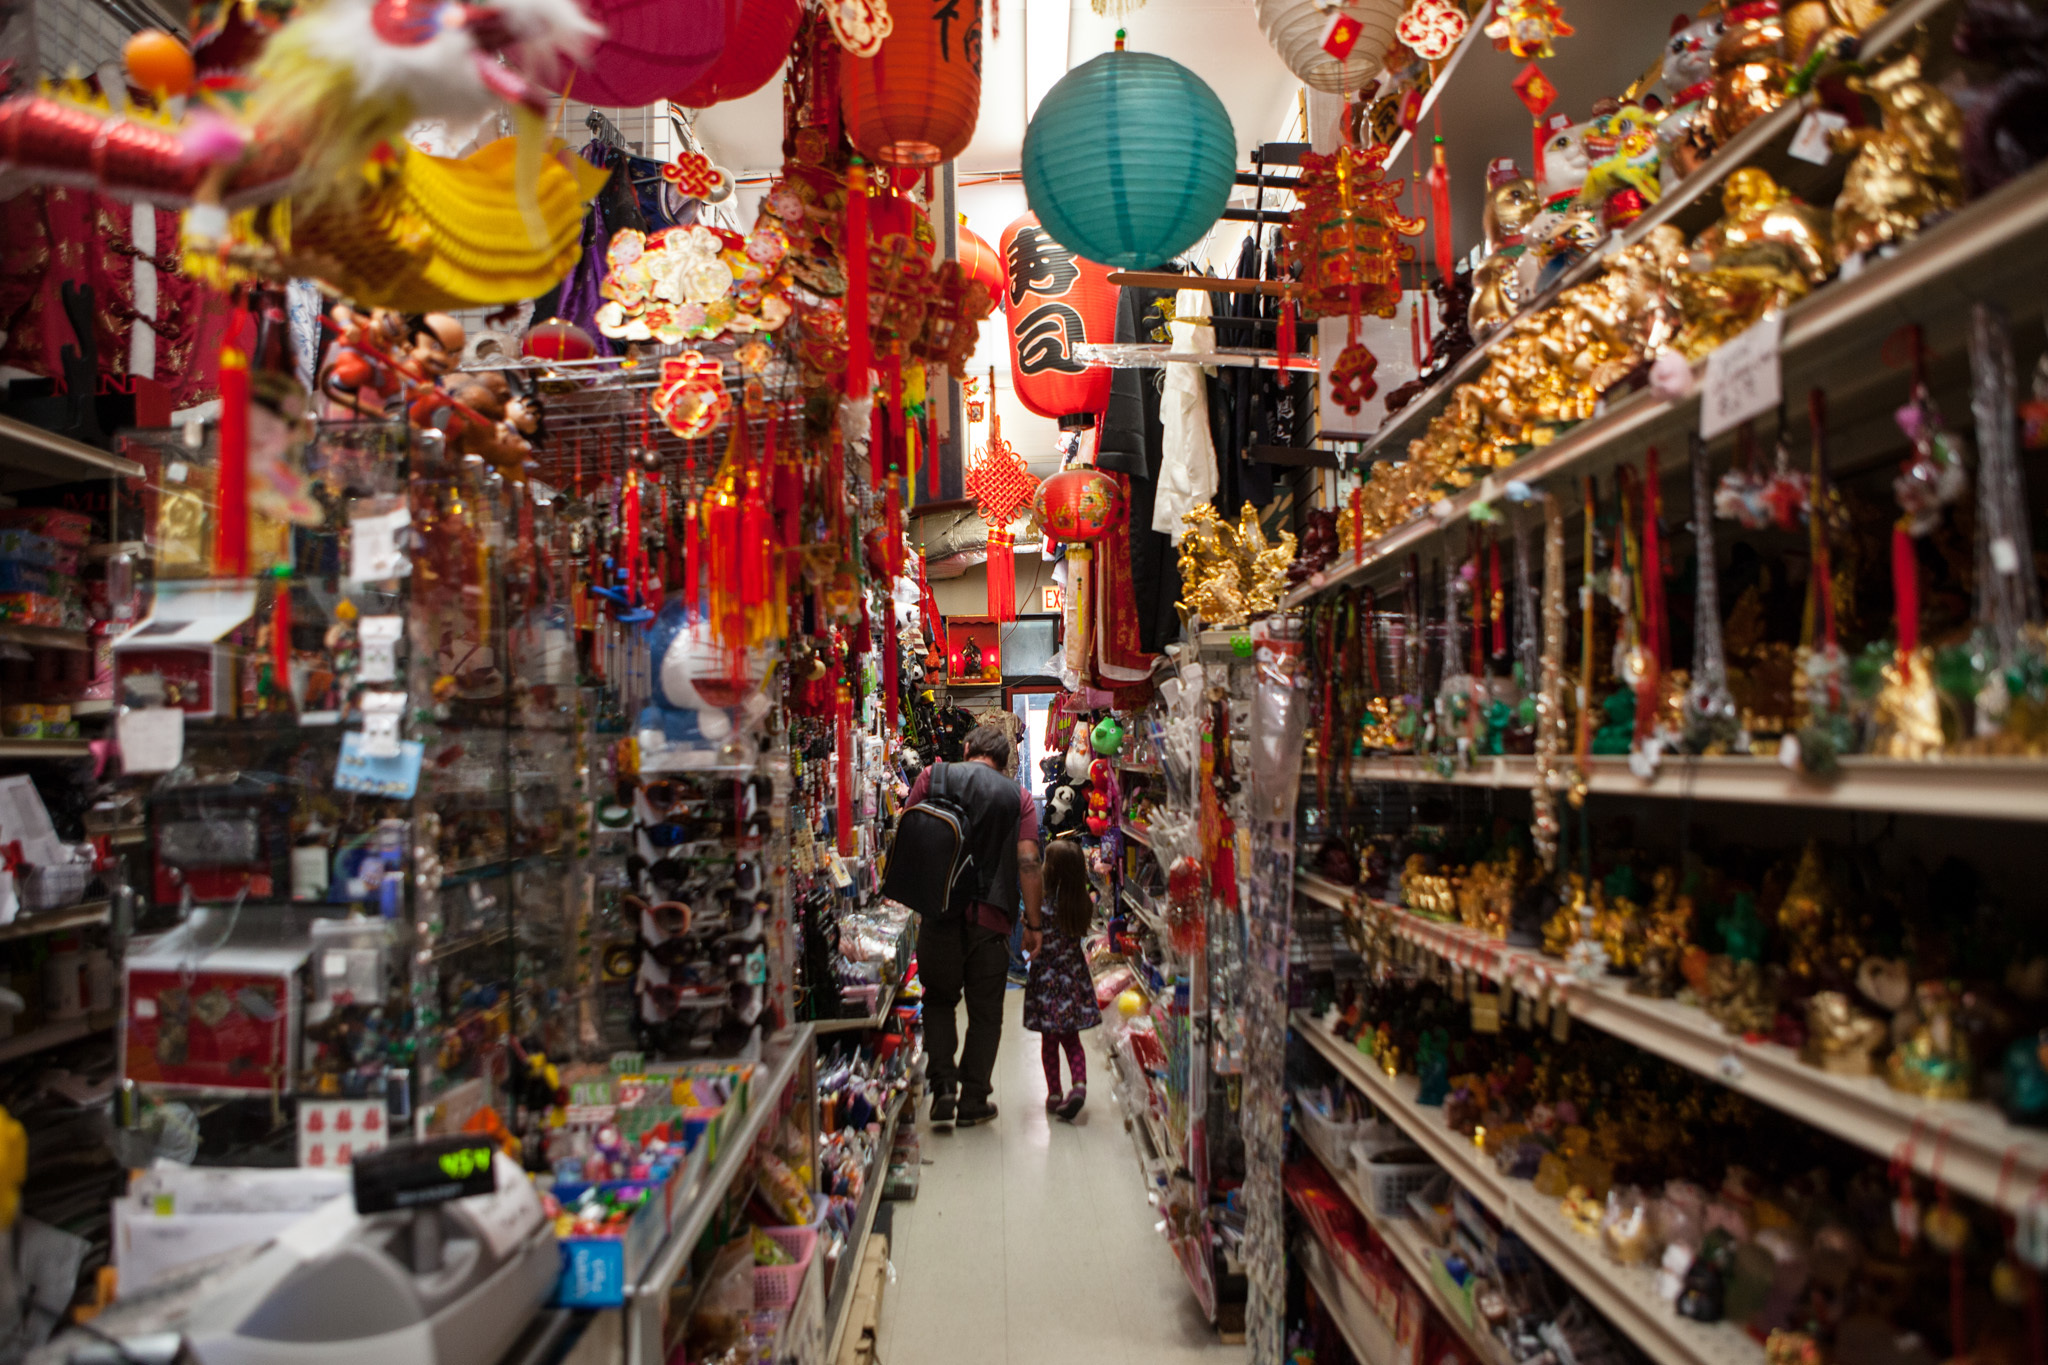 The best Chinatown shops, from jewelry stores to candy shops